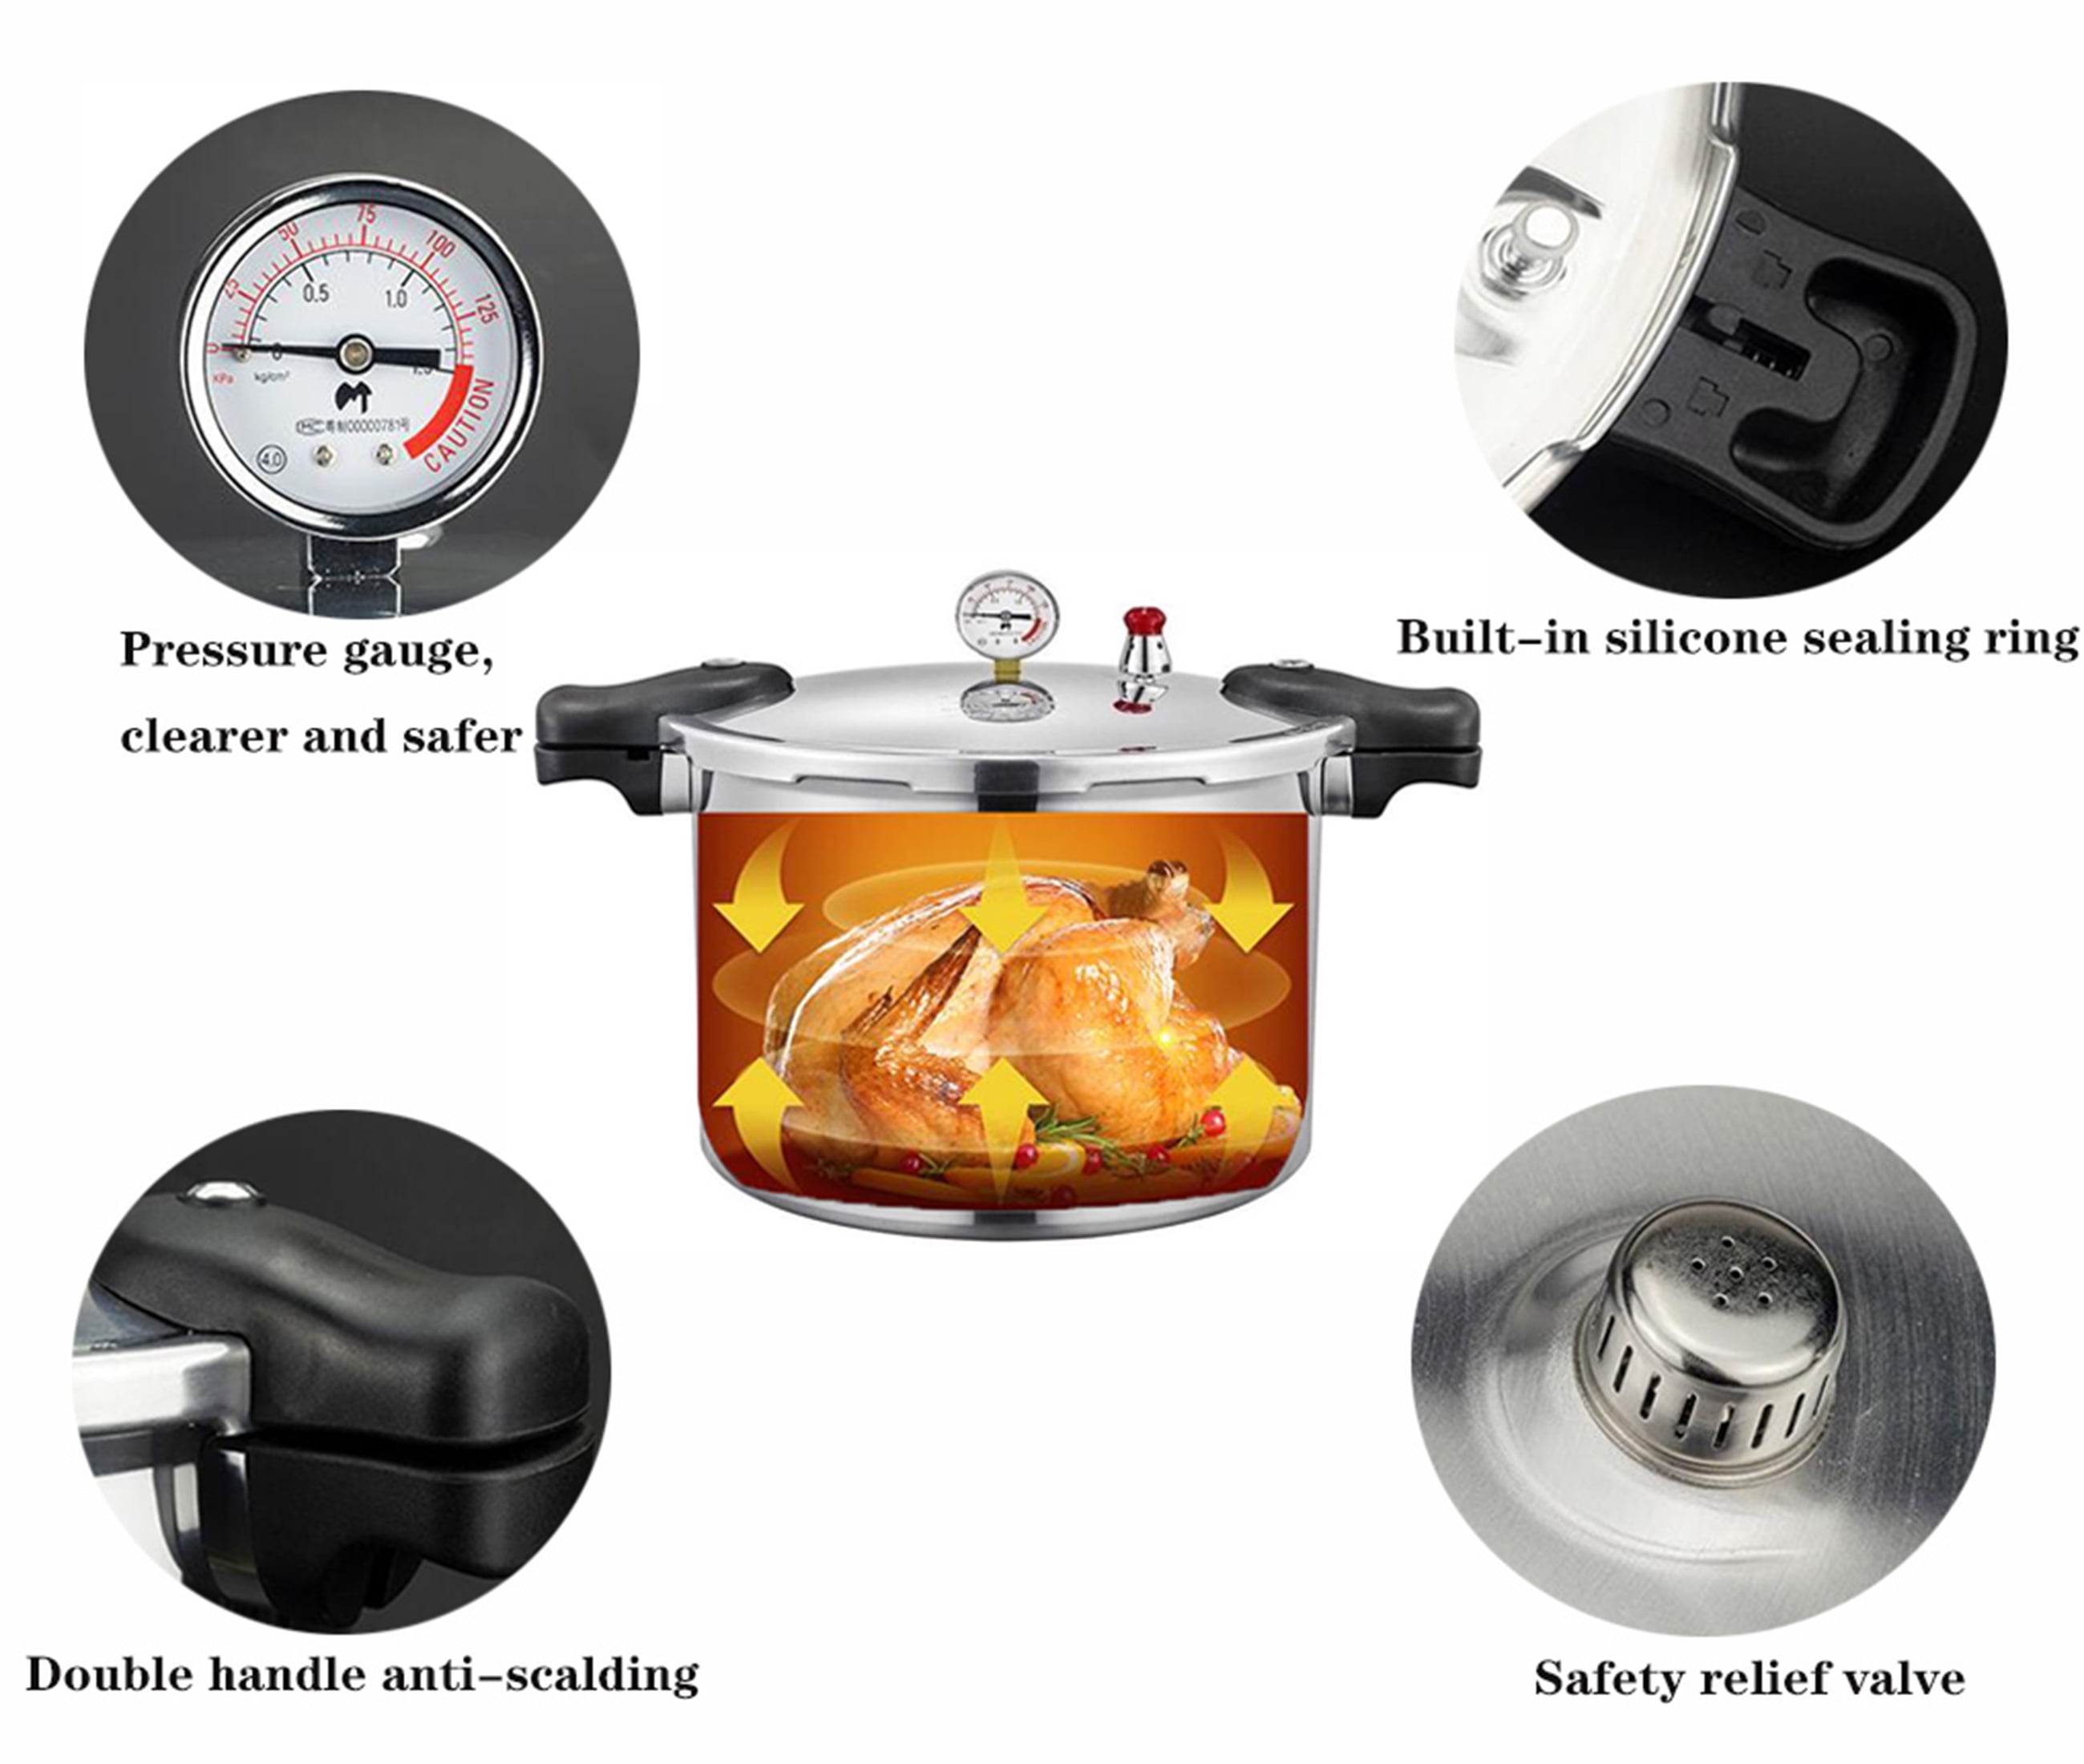 GHKWXUE 15quart High capacity pressure cookers with cooking rack canning  canner gauge Explosion proof safety valve Extra-large size great for big